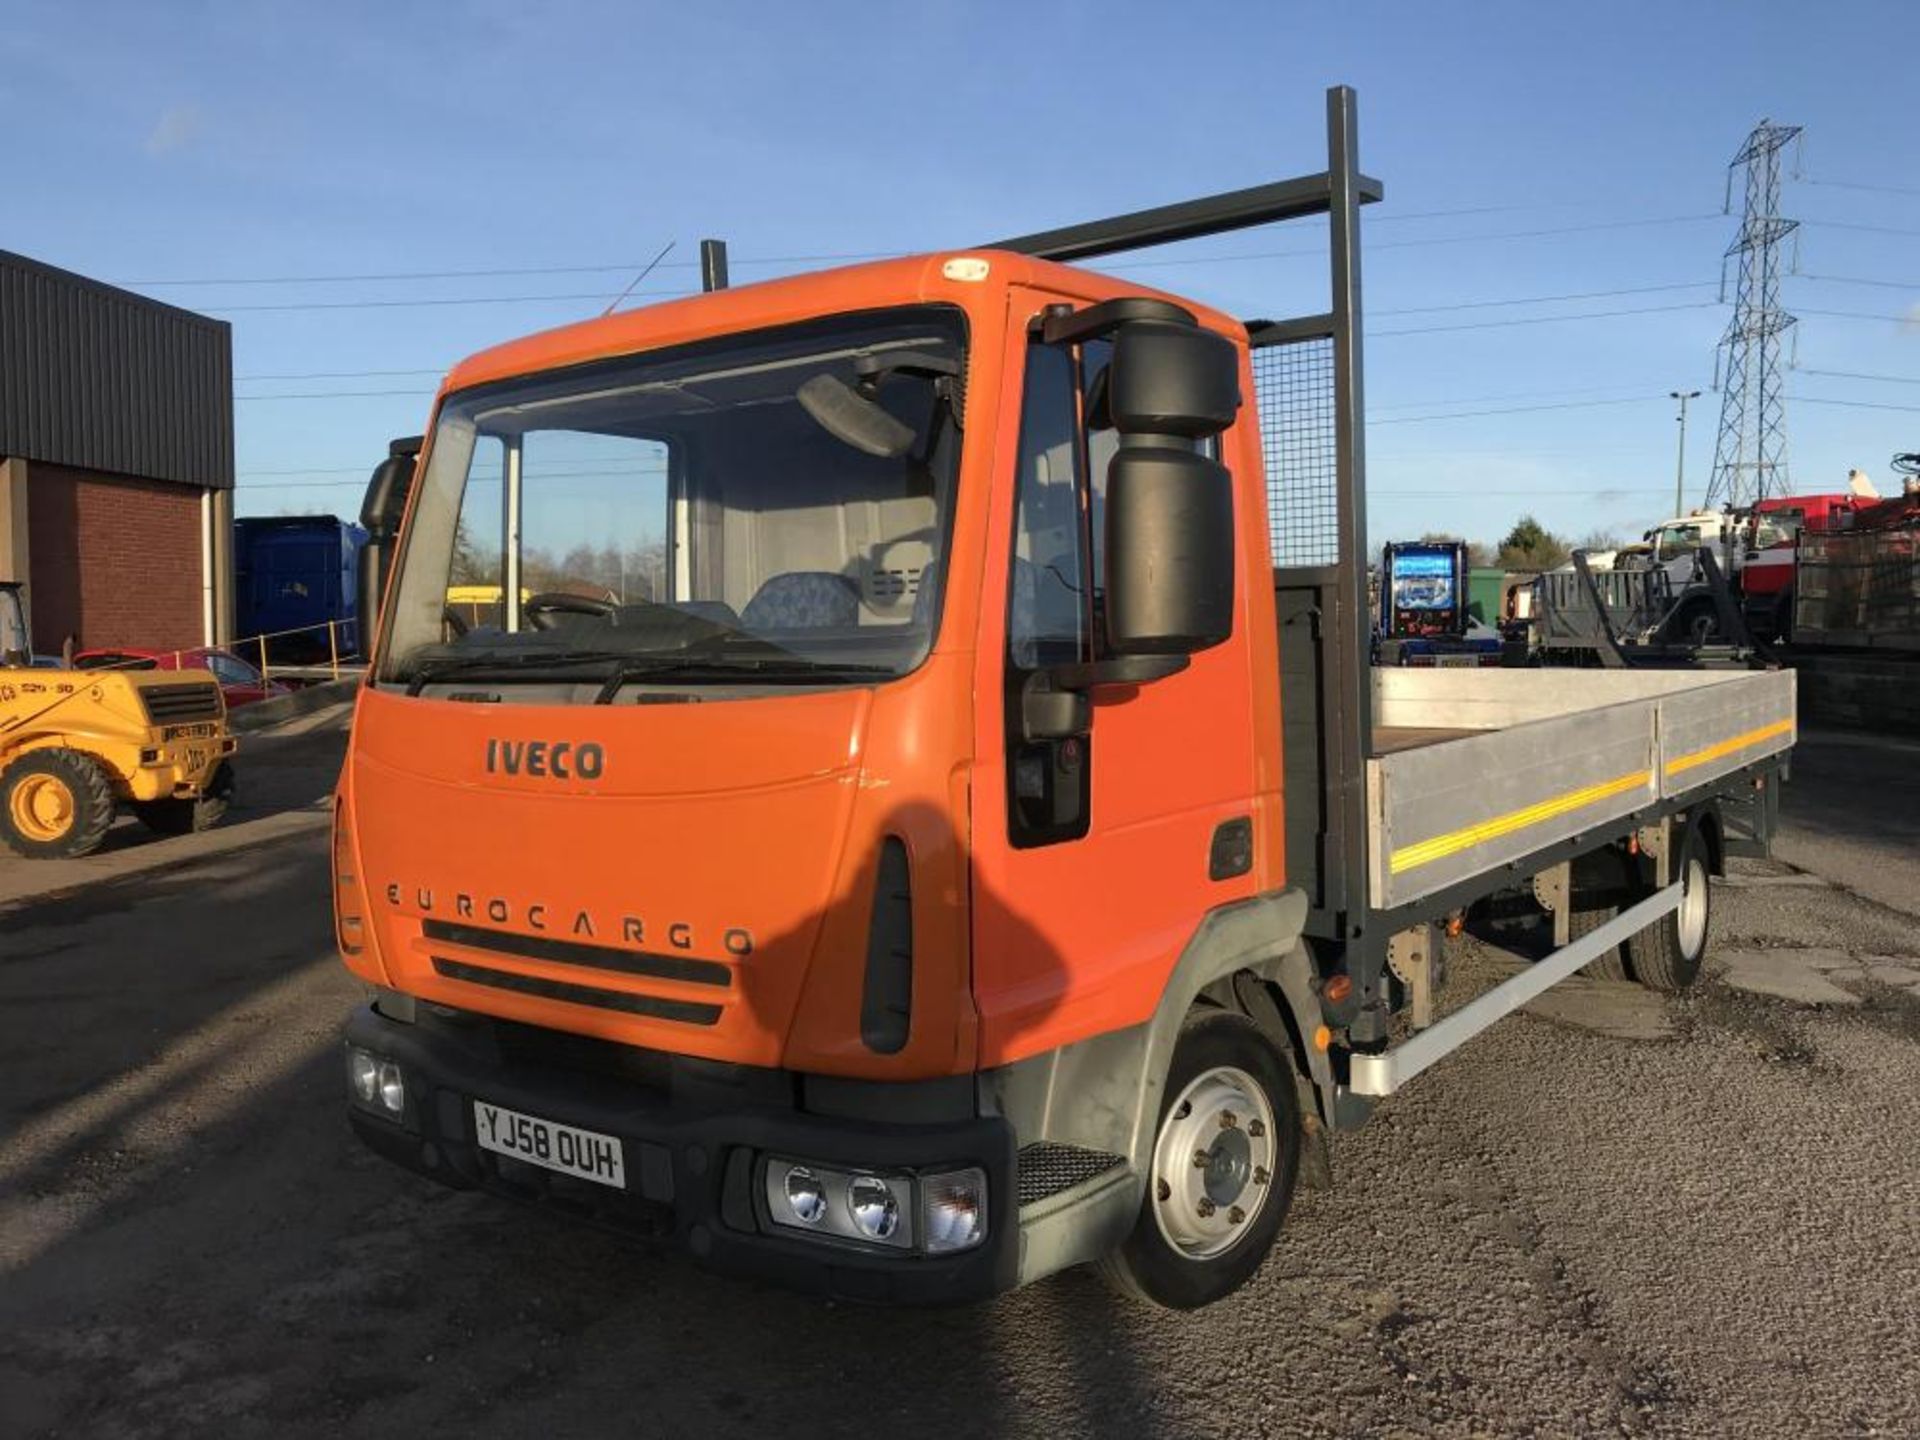 2008/58 REG IVECO EUROCARGO 75E16 DROP SIDE TRUCK 7.5 TON ONLY 112,000 MILES, MANUAL GEARBOX - Image 2 of 14